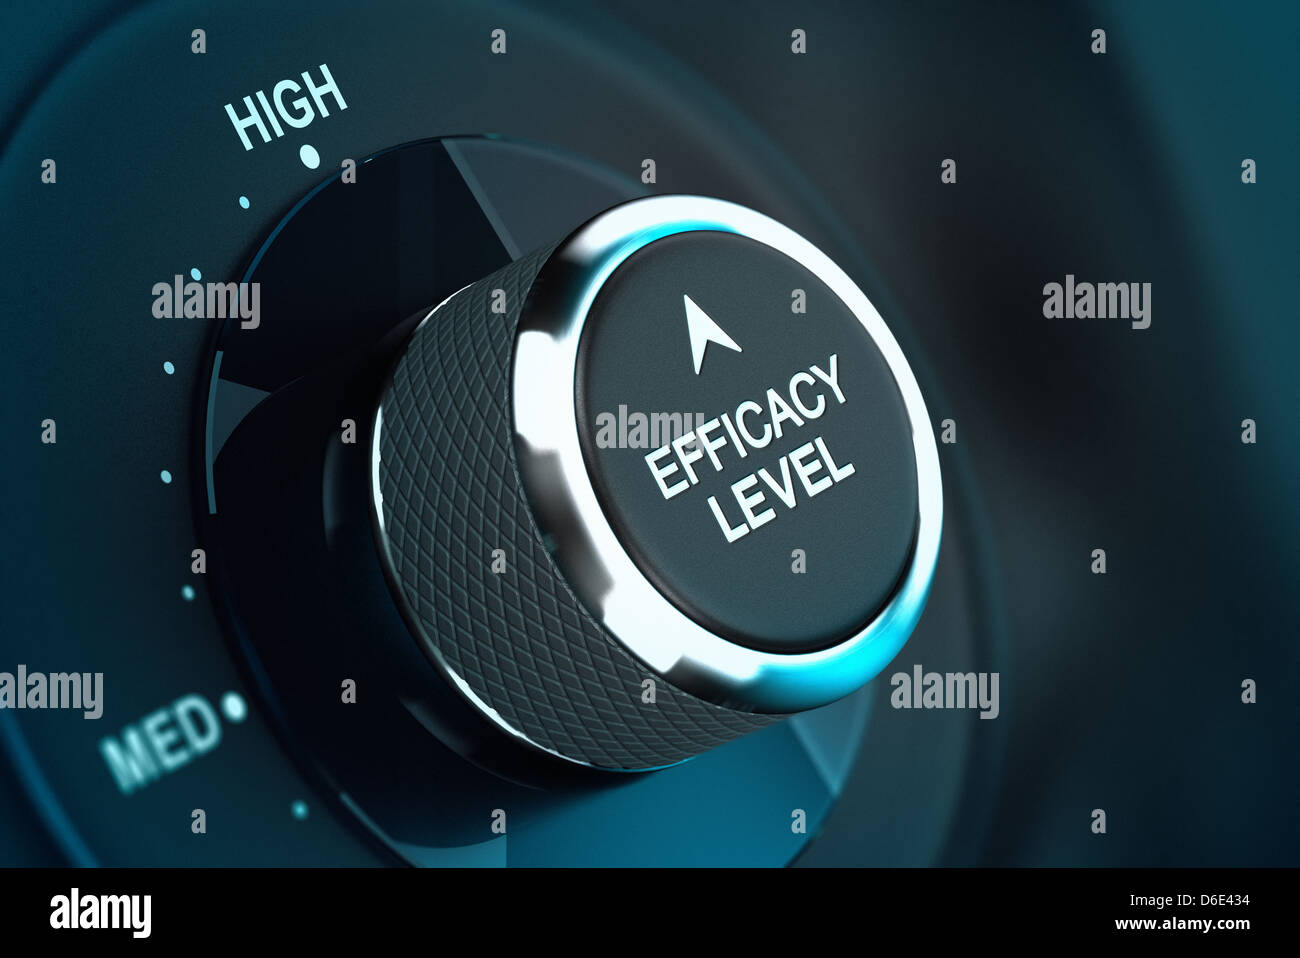 Self efficacy level button over black and blue background, conceptual image to illustrate efficiency or performance management. Stock Photo